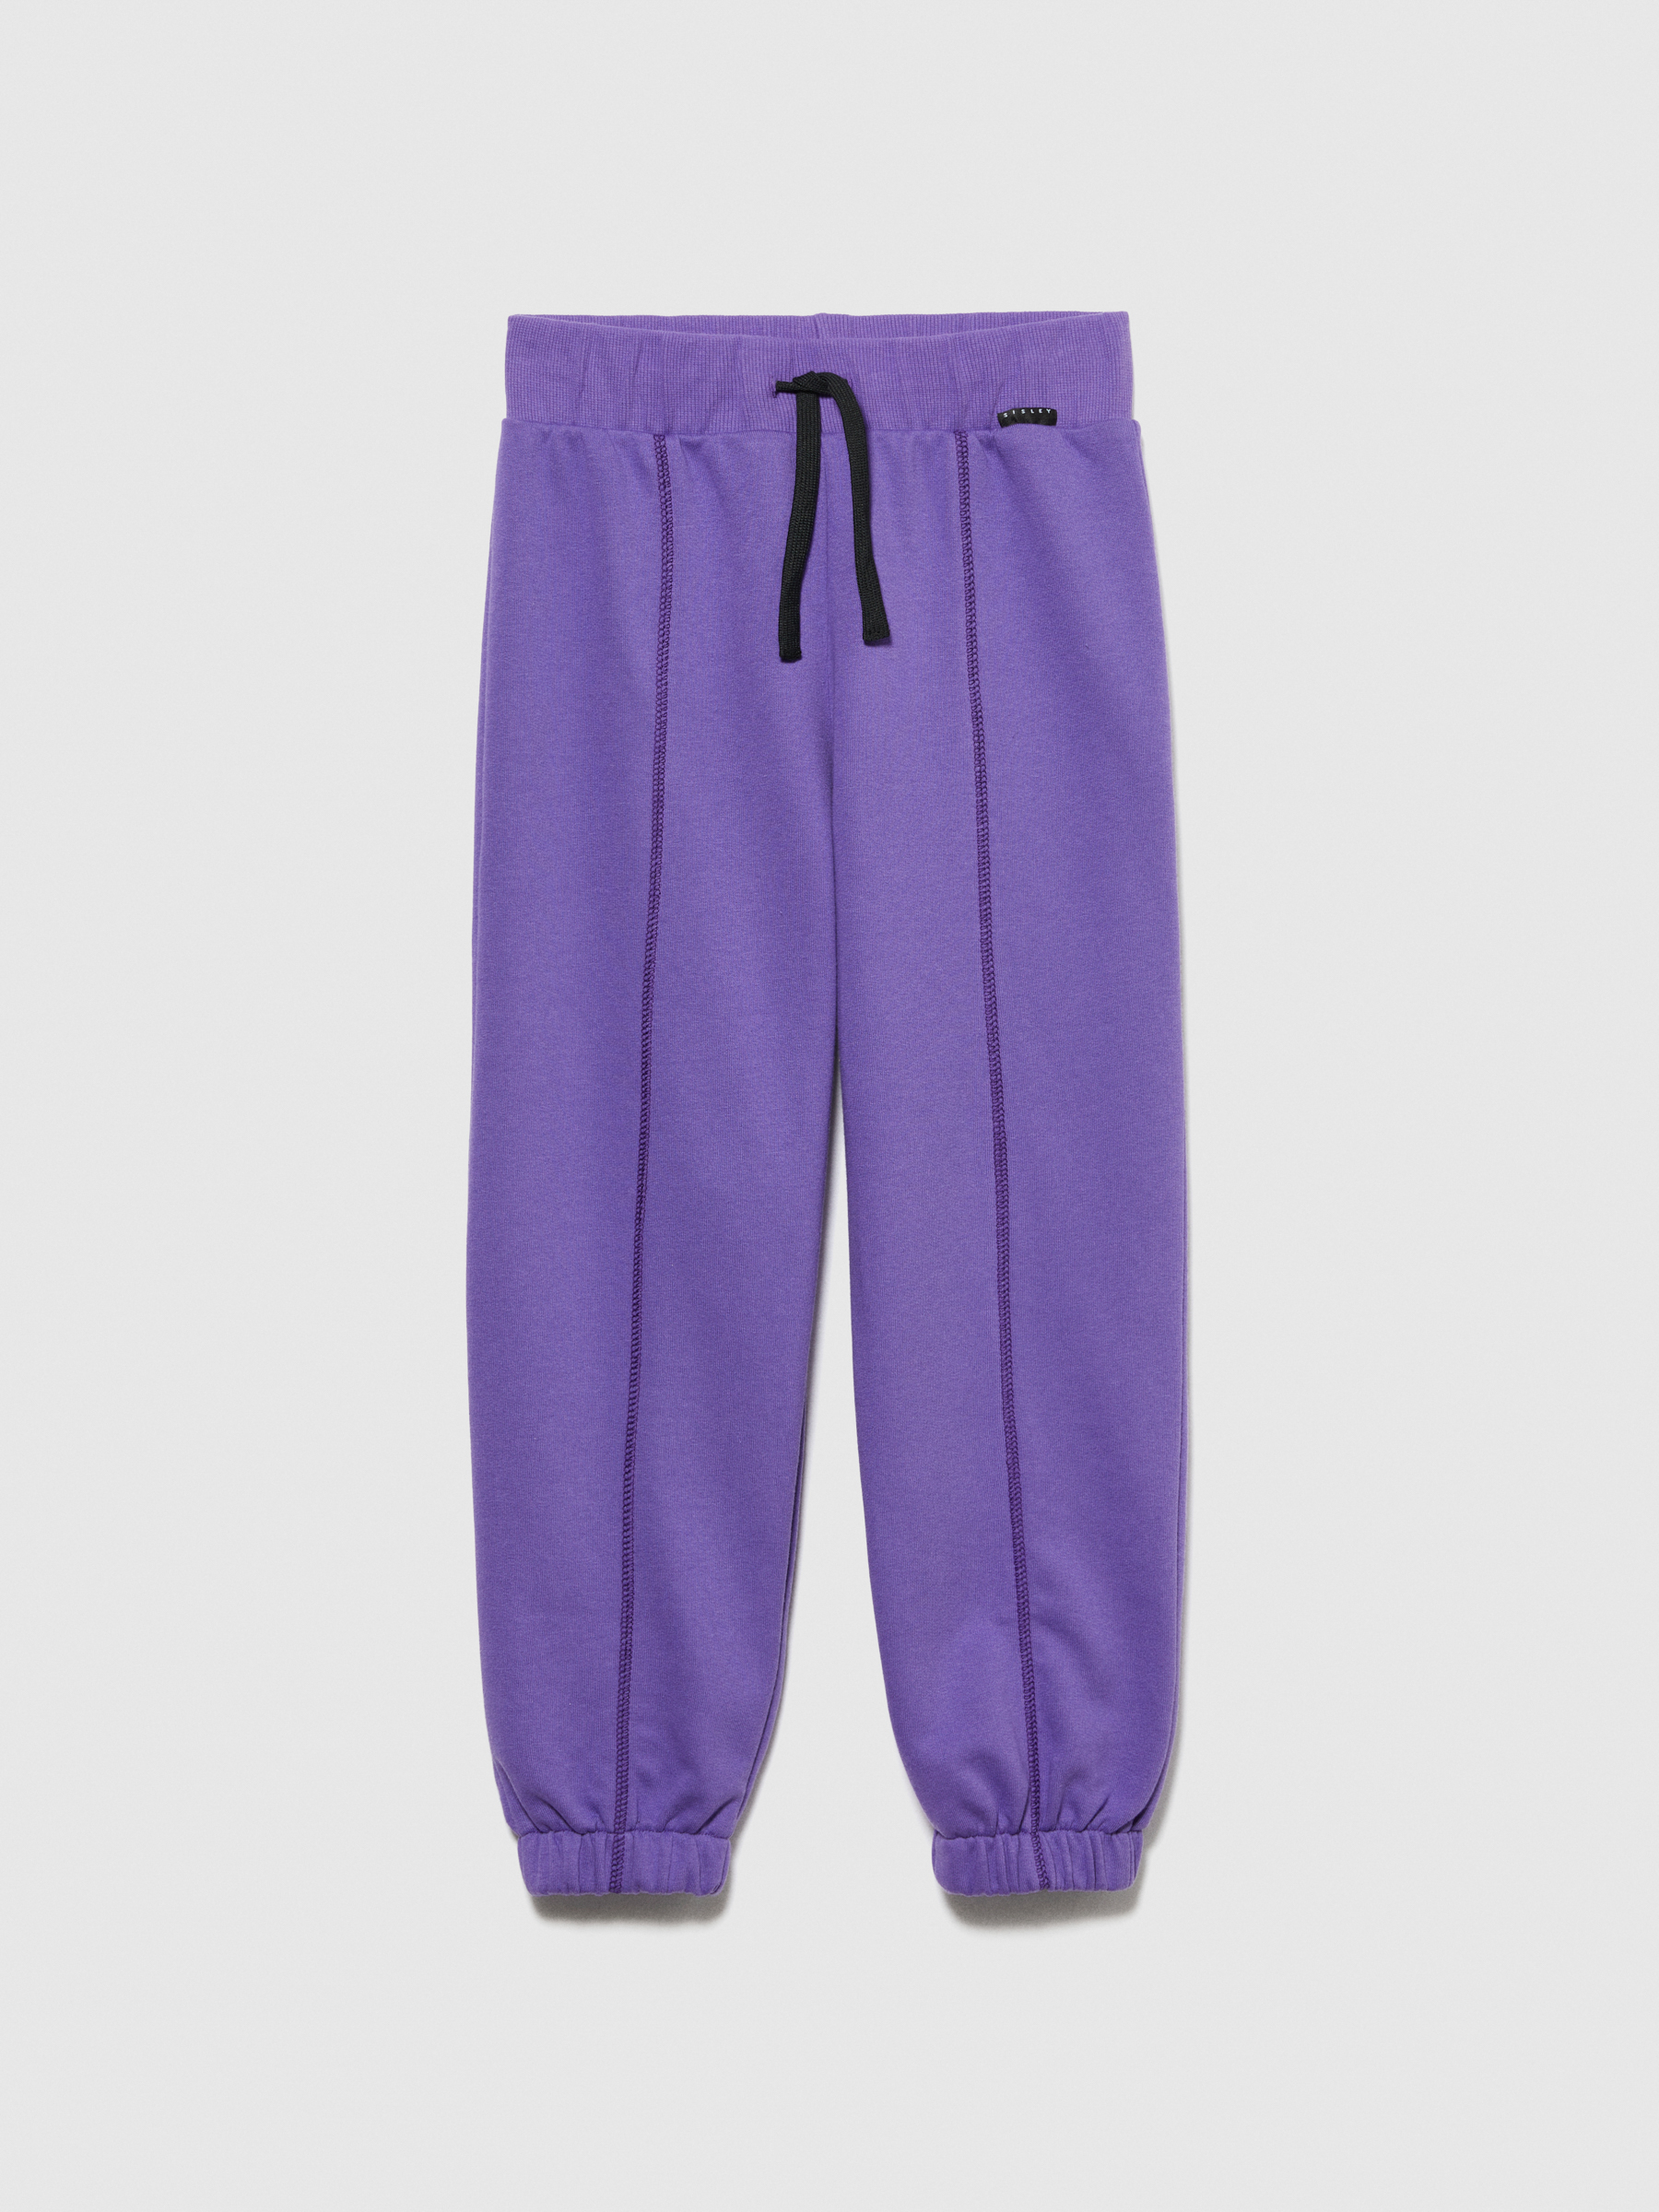 Sisley Young - Oversized Fit Joggers, Woman, Violet, Size: KL